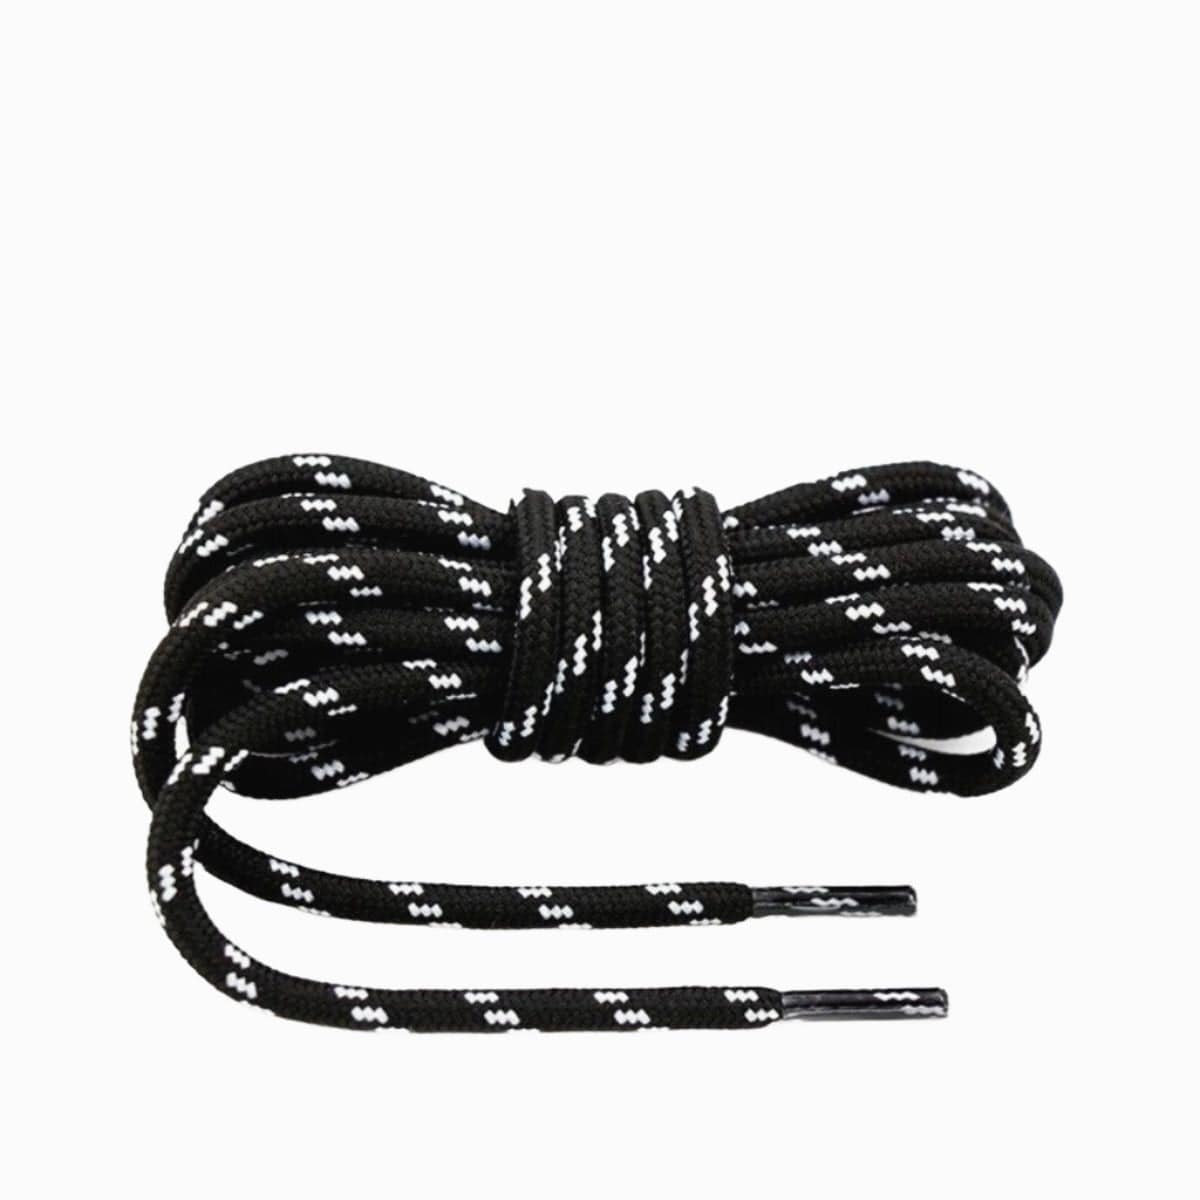 trekking-shoe-laces-united-states-in-black-and-white-shop-online